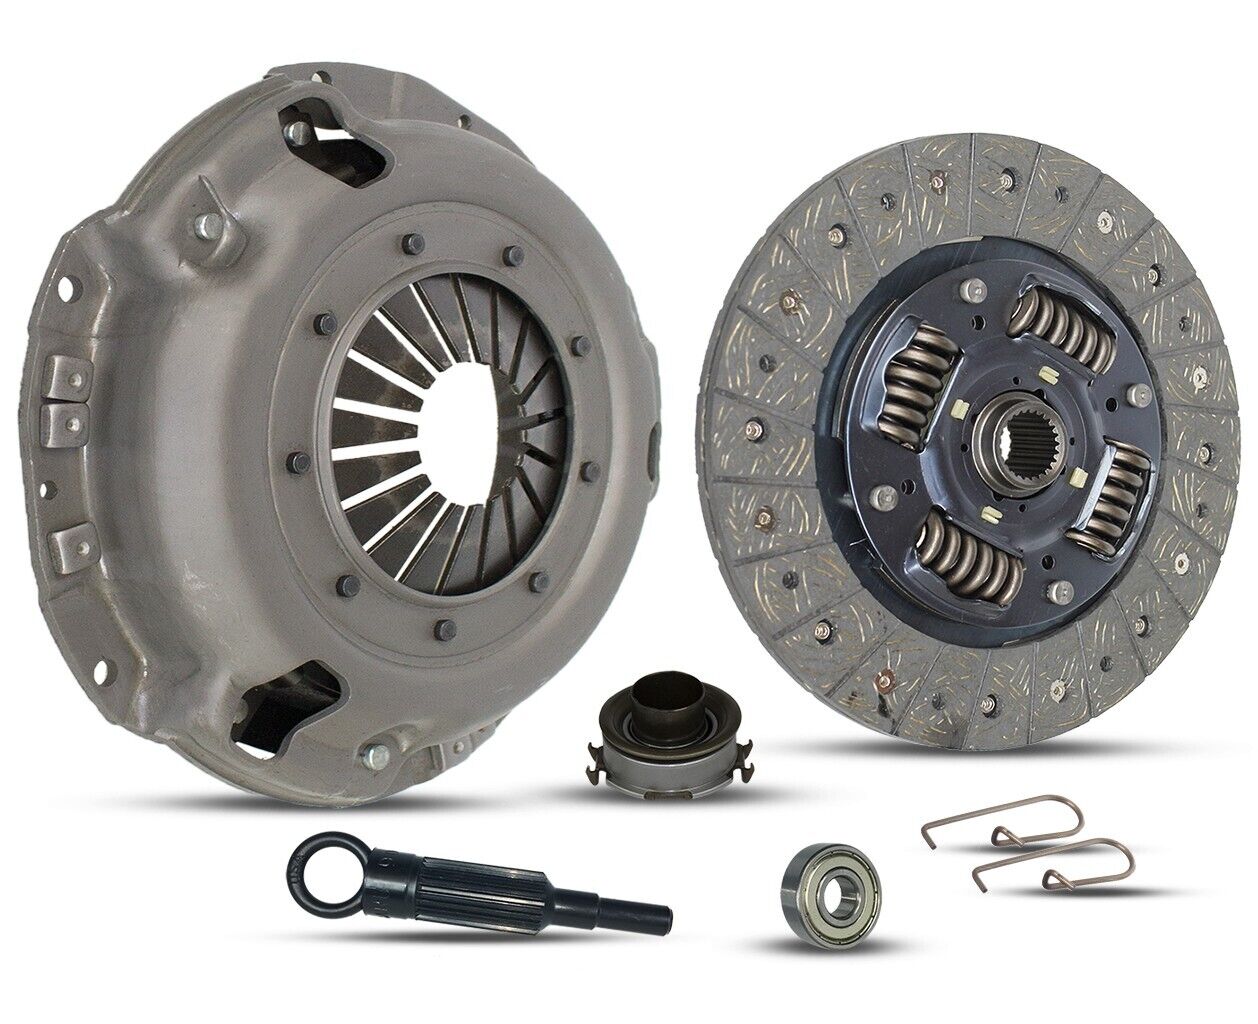 CLUTCH KIT AND SLEEVE REPAIR FOR 96-11 SUBARU IMPREZA FORESTER LEGACY OUTBACK NT